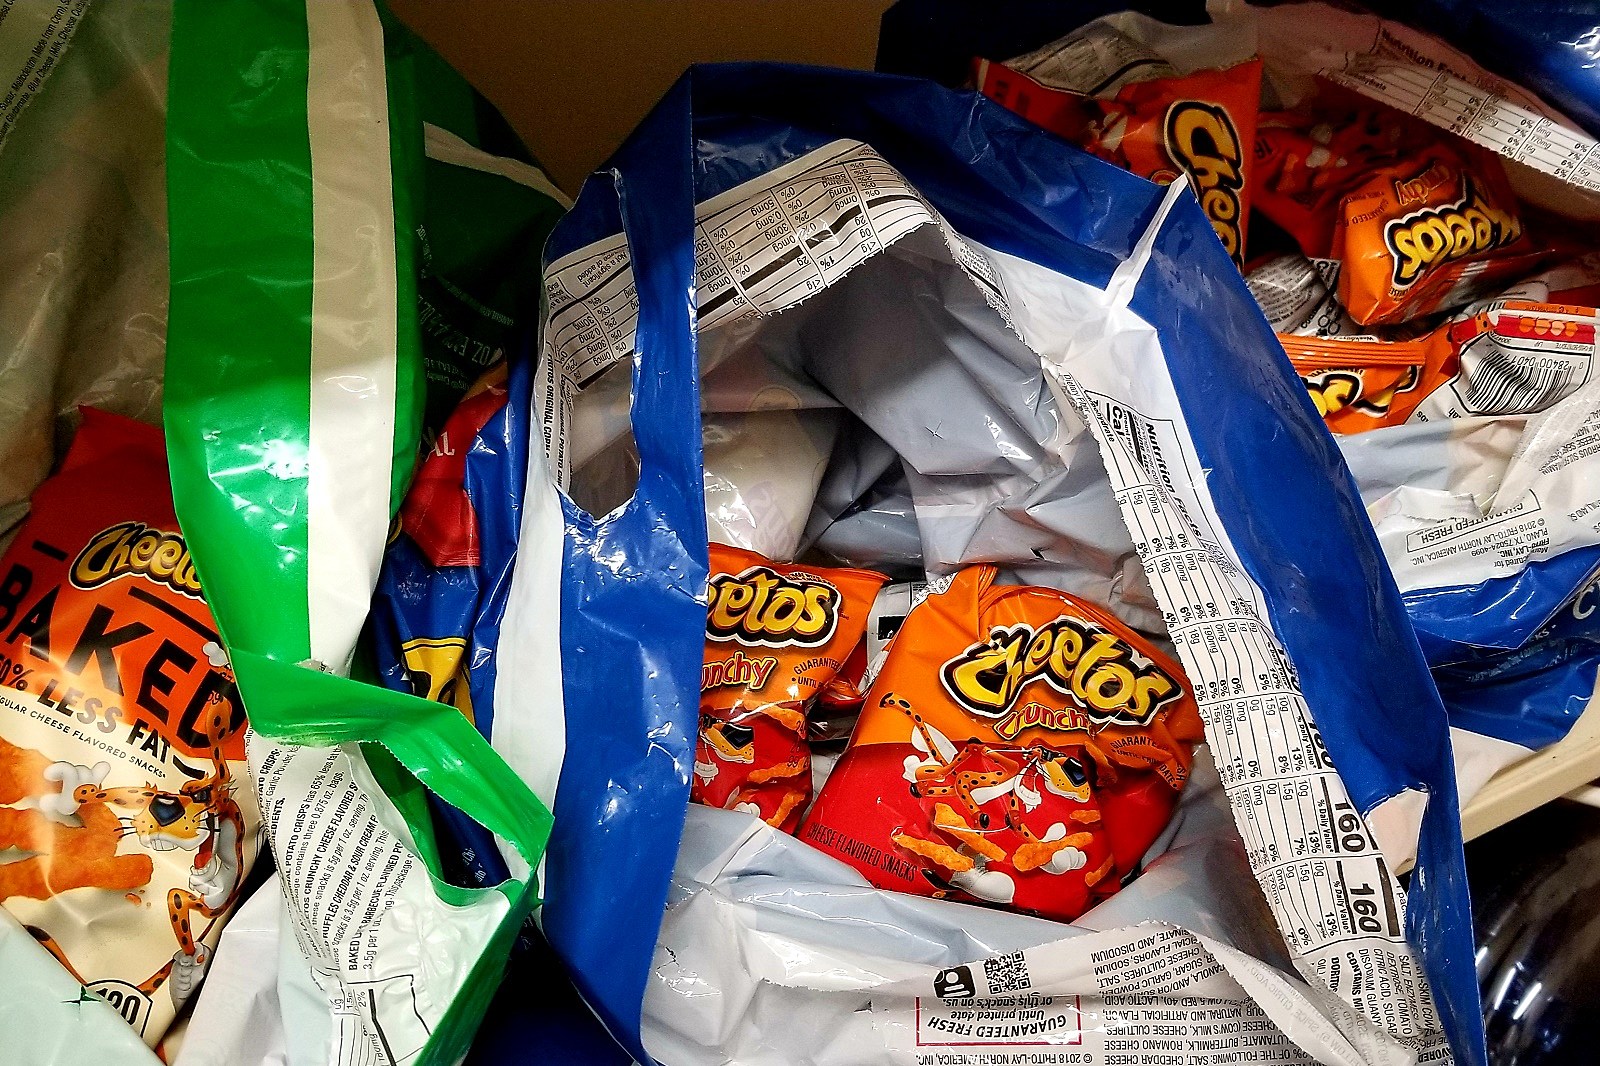 What's Up with All These Bags of Cheetos?